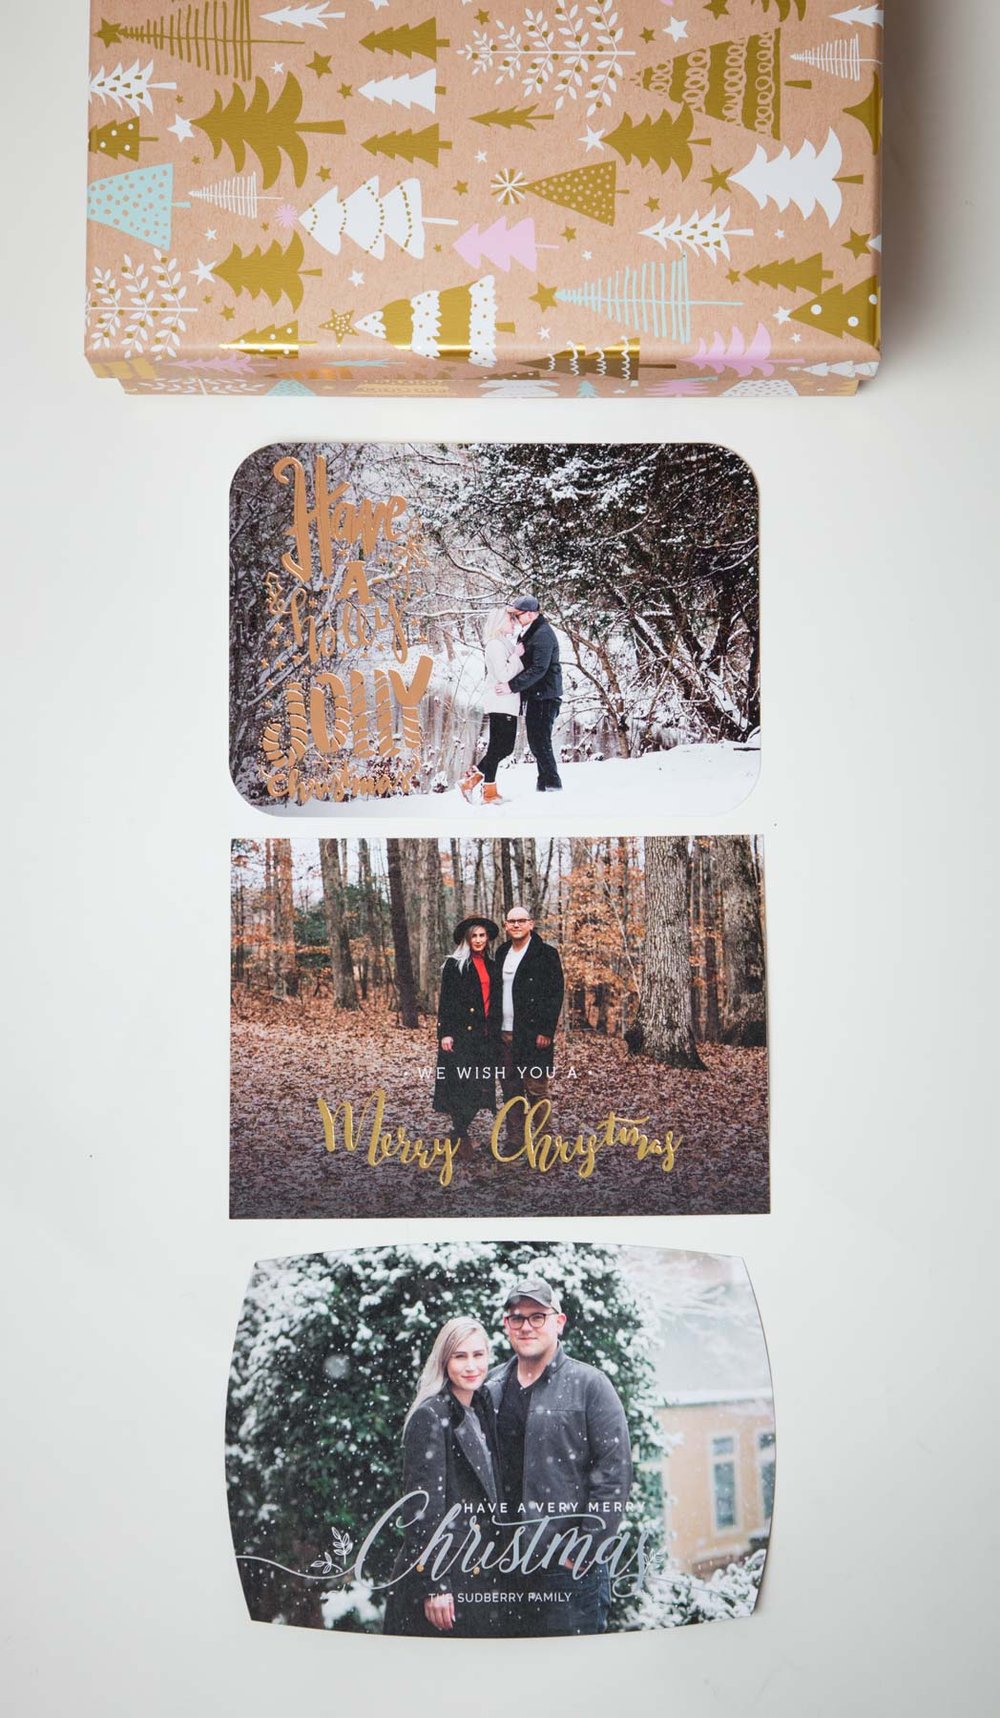 sudberry photography photo gifts -7844.jpg